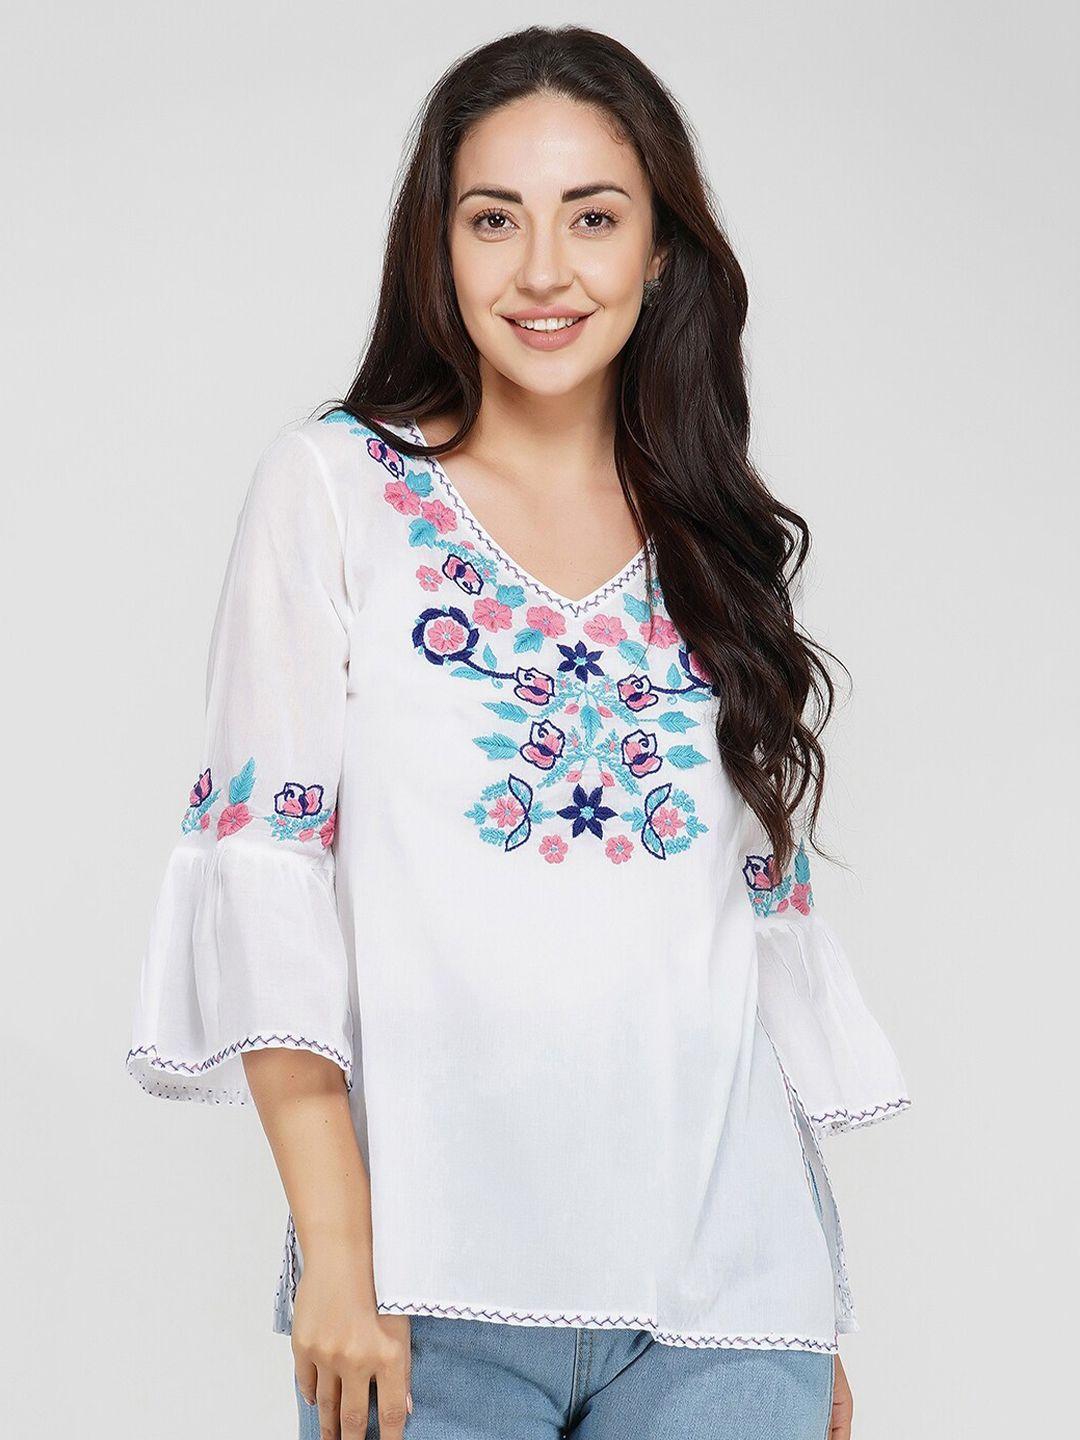 vahson white & blue floral embroidered top